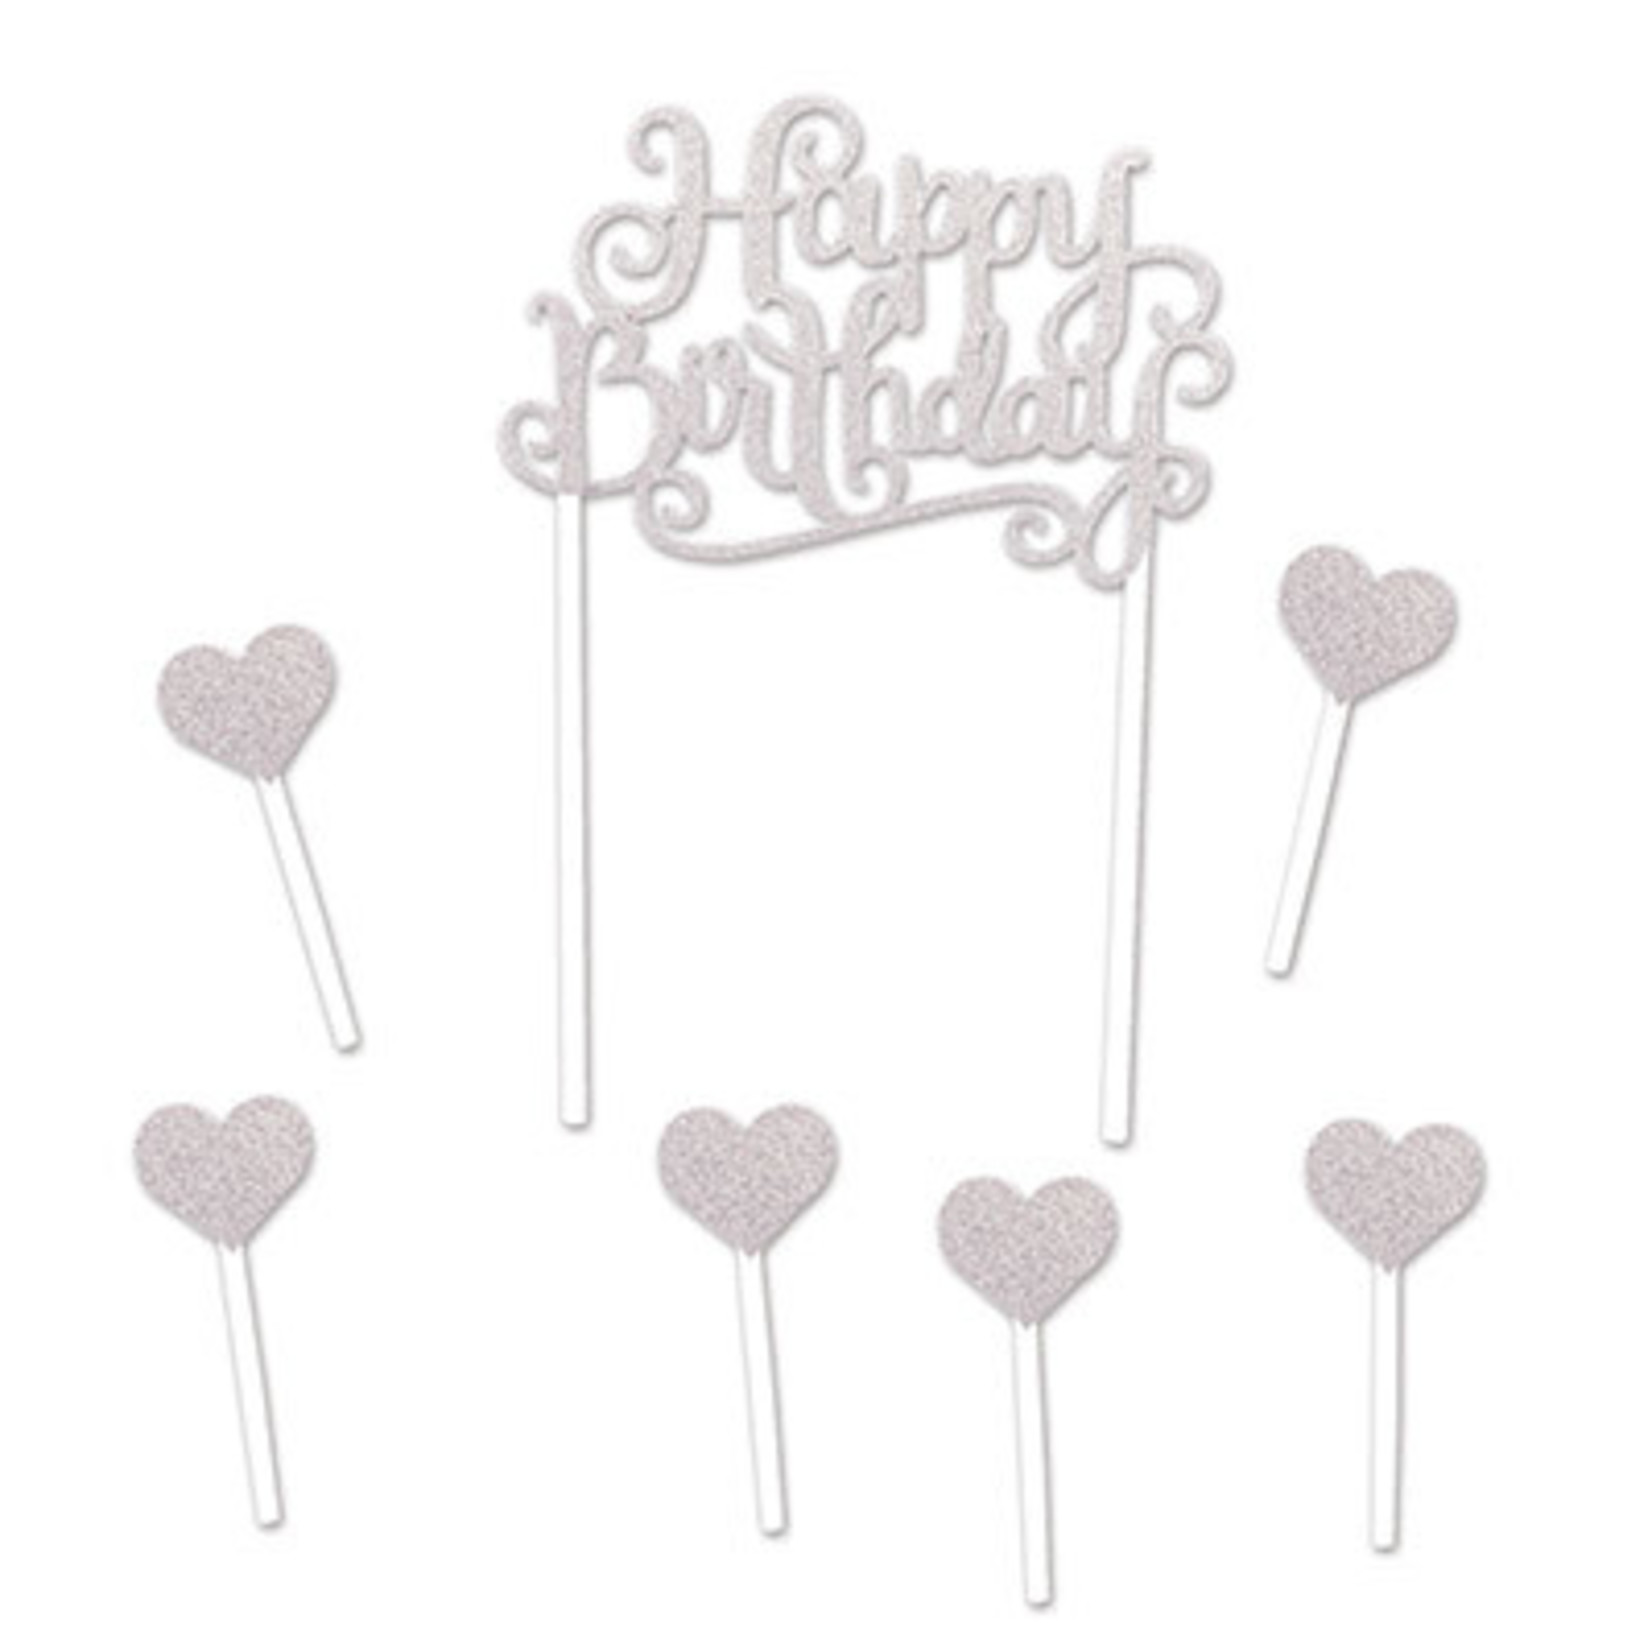 Beistle Silver Happy Birthday Cake Topper - 7ct.